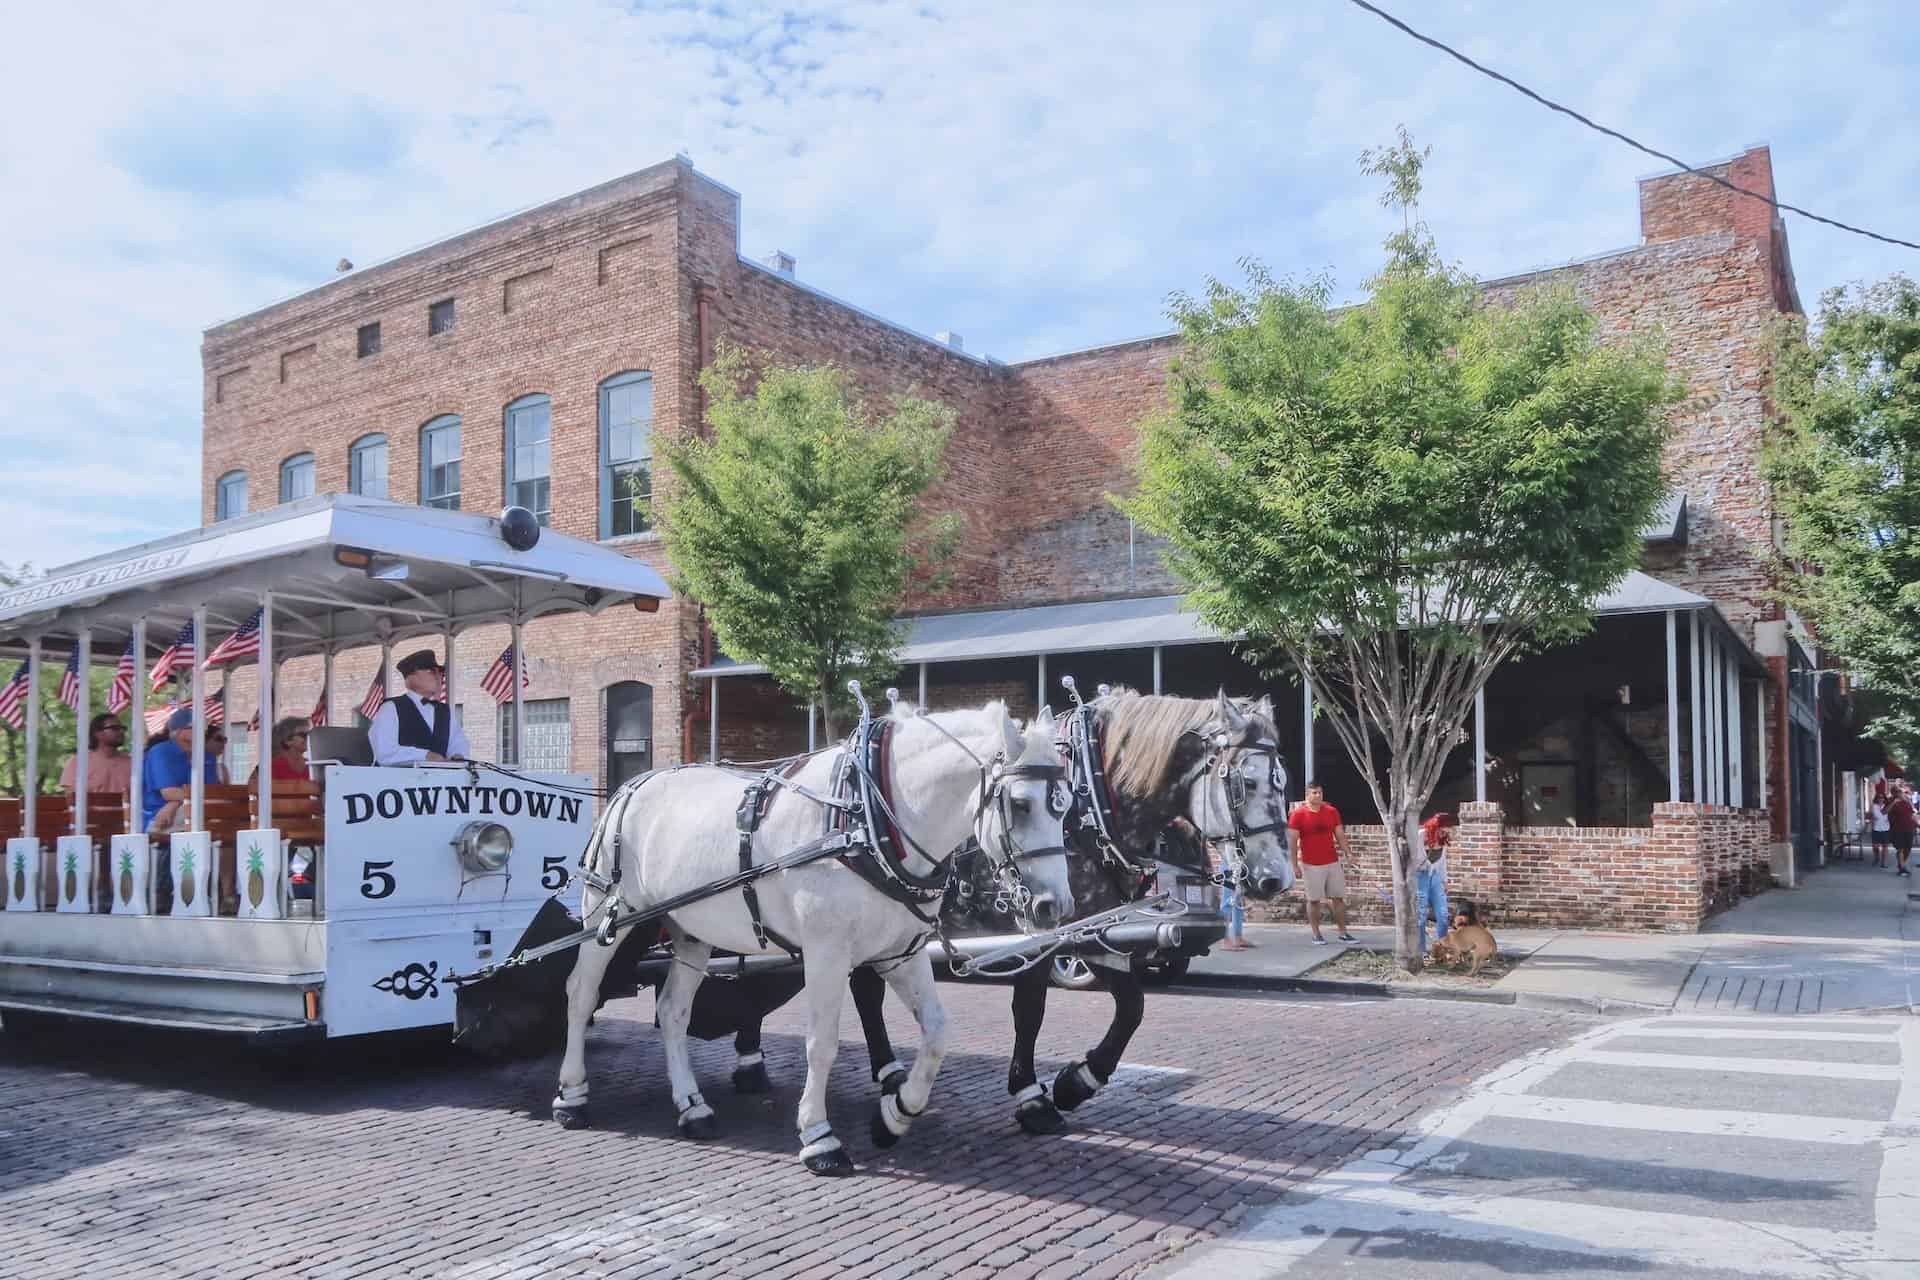 Best things to do in Wilmington NC - Pat Stoy - Horse drawn trolley by Wentao Liu on Unsplash